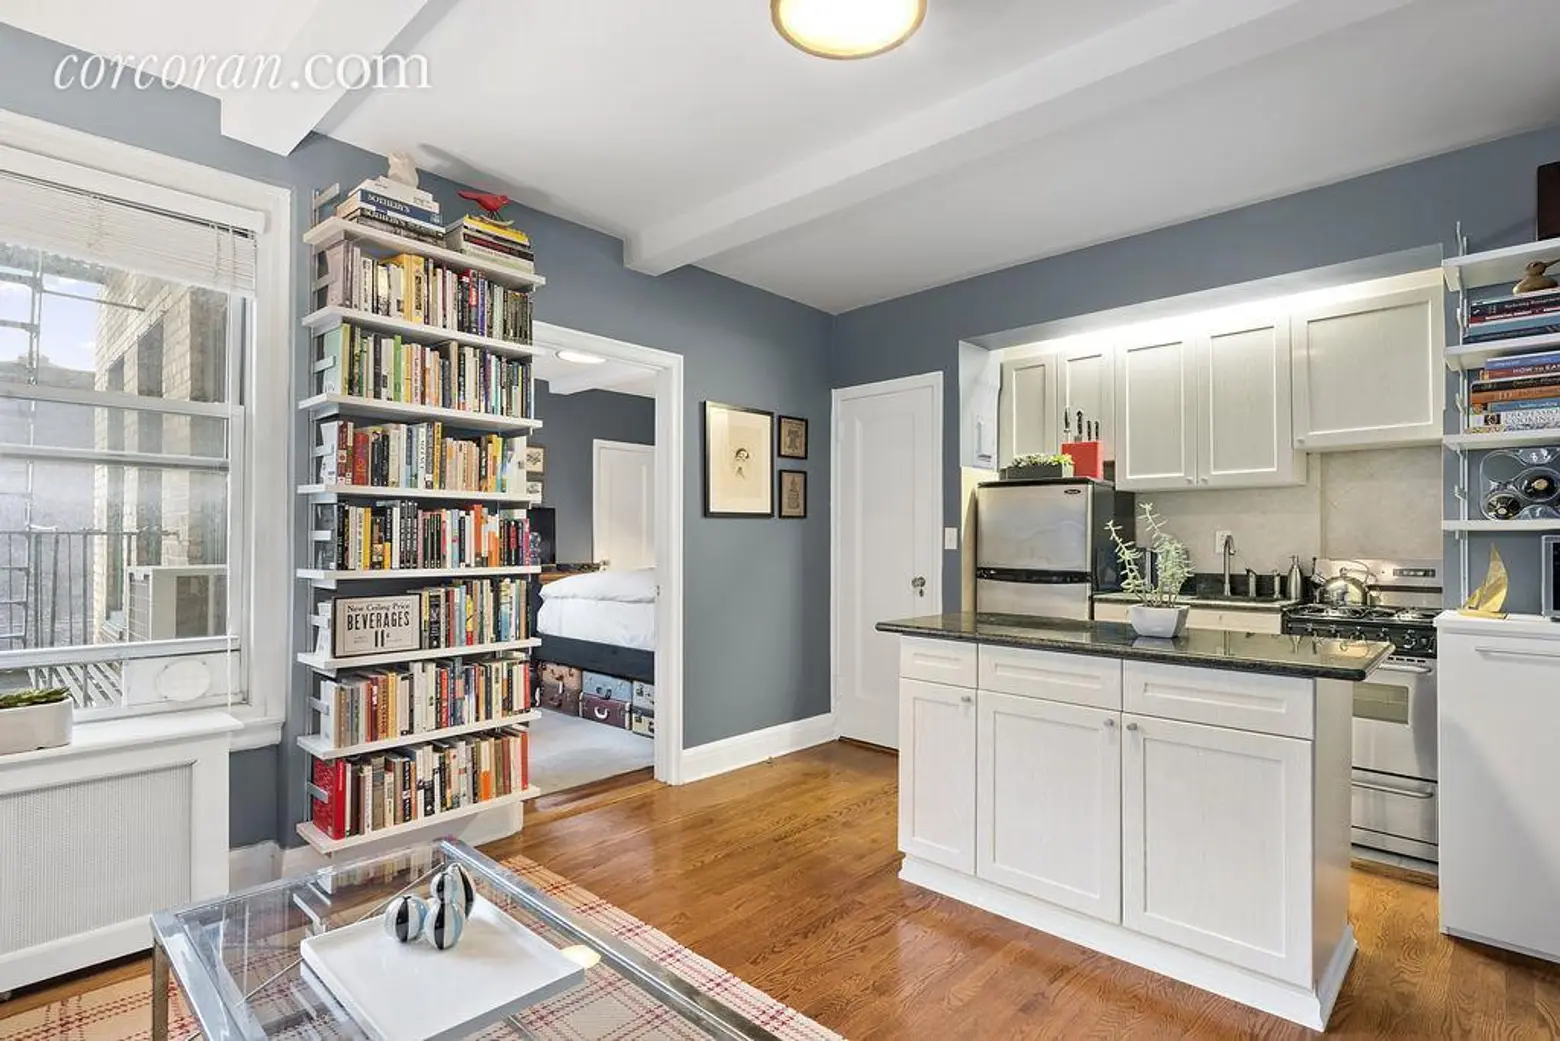 The whitby, kitchen, one bedroom, co-op, 325 West 45th Street